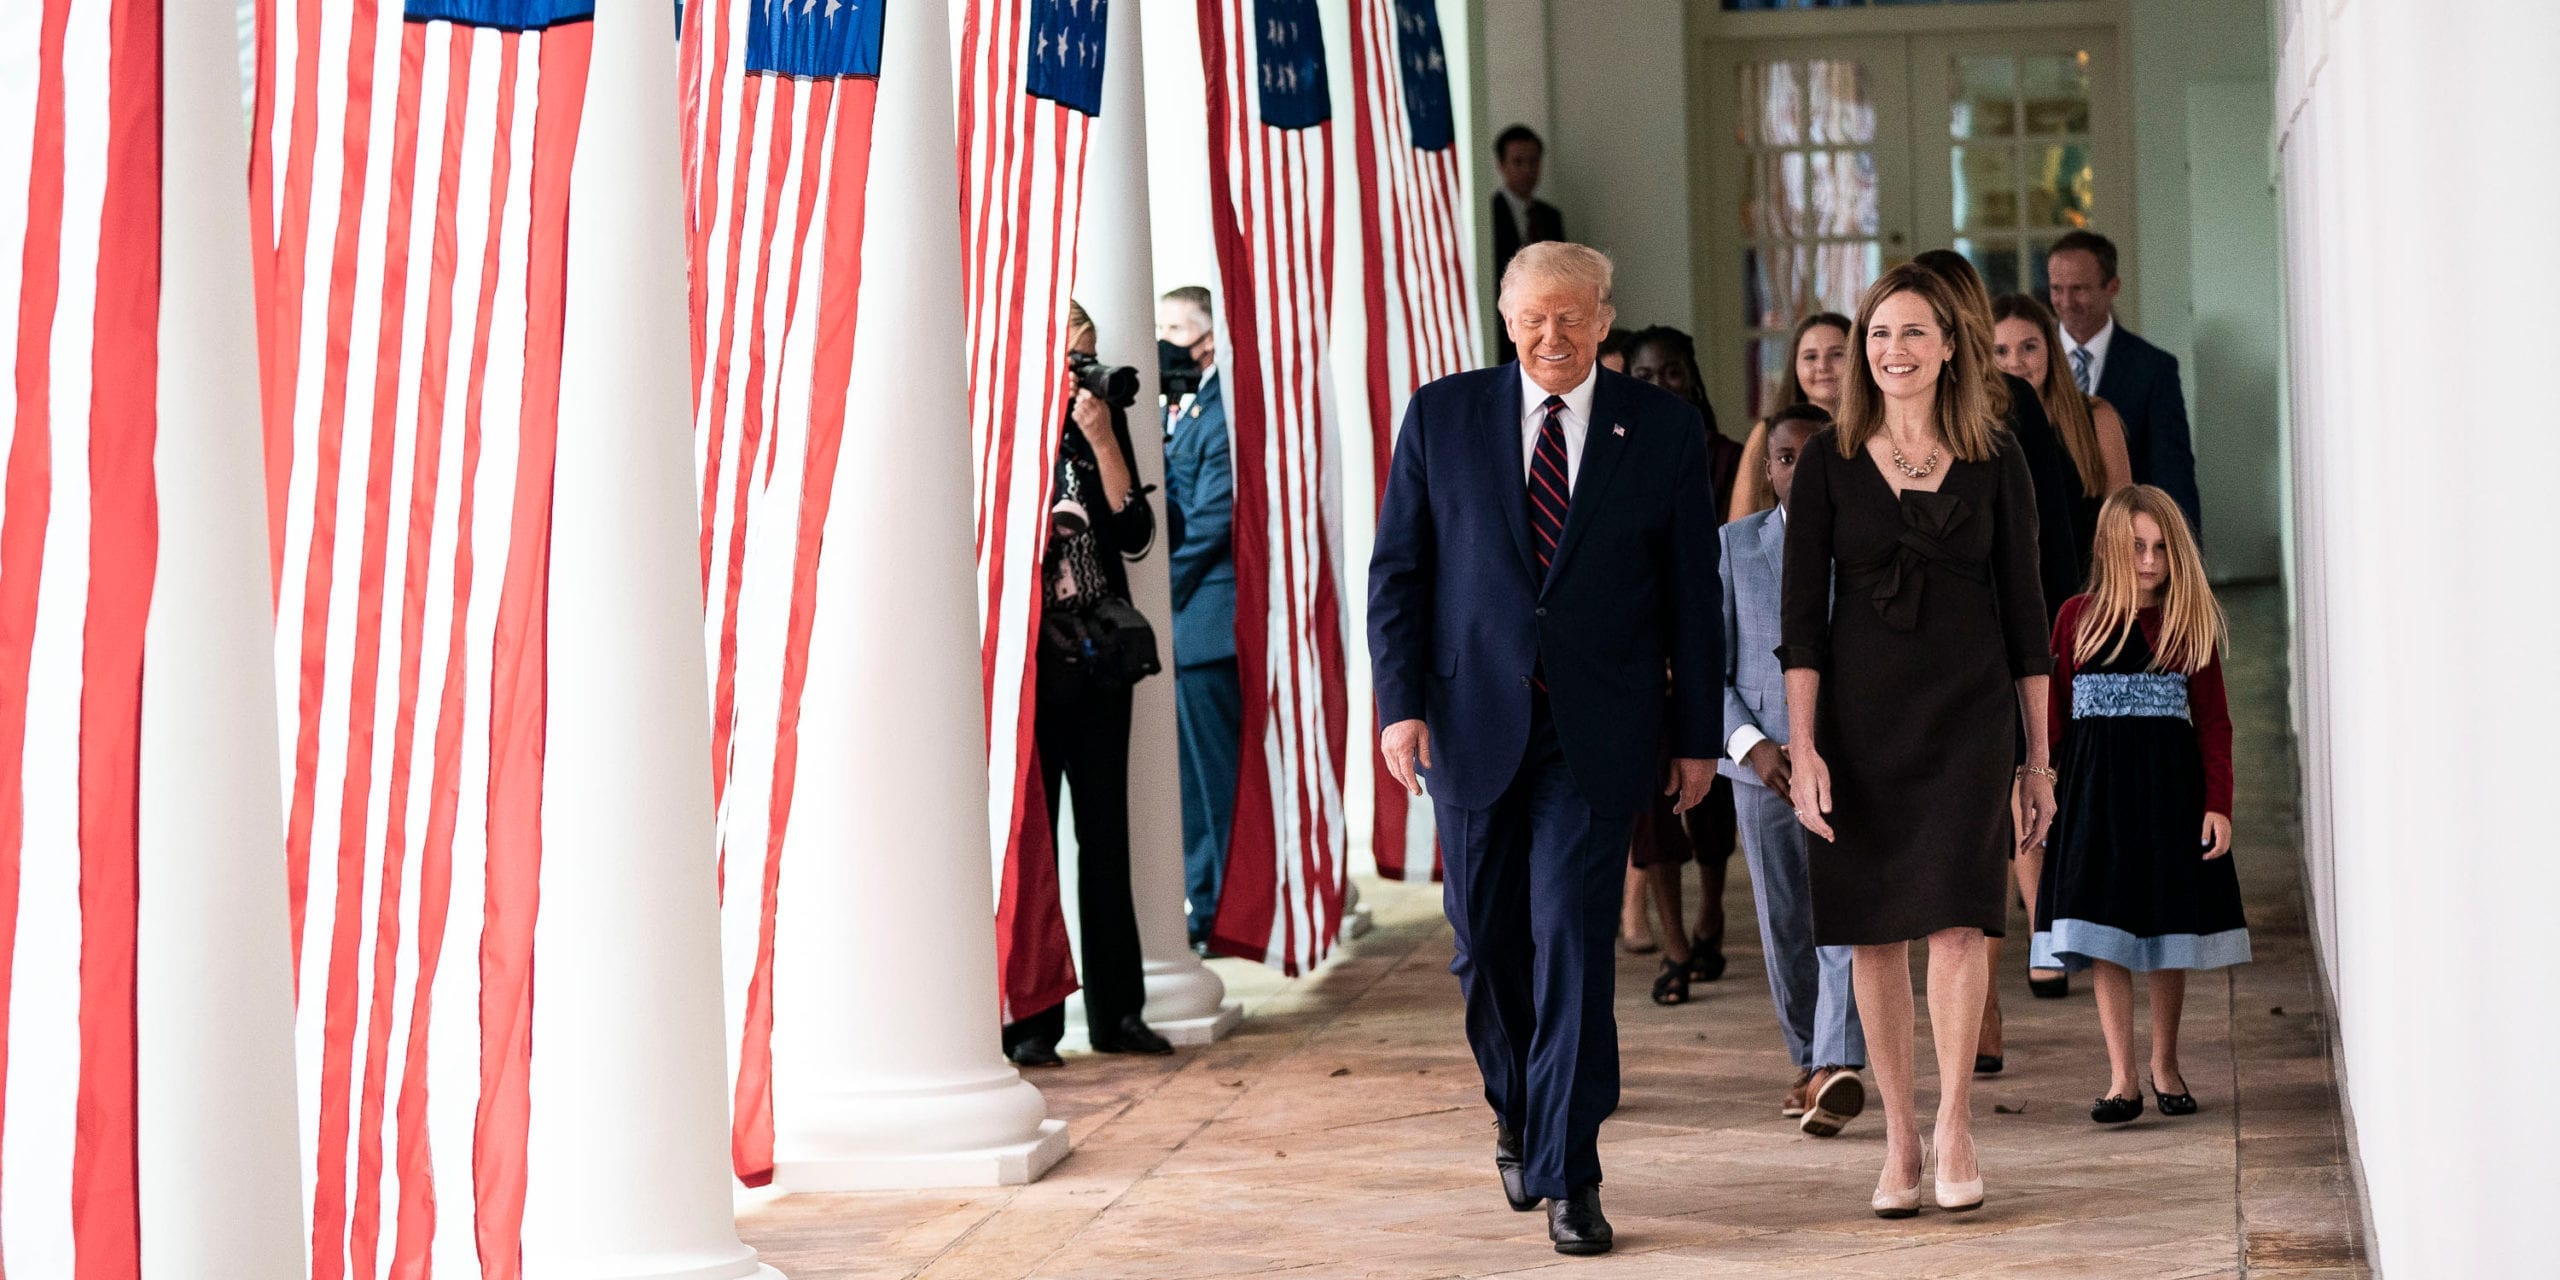 President Donald Trump and Supreme Court nominee Amy Coney Barrett at the White House. Photo courtesy of the White House.